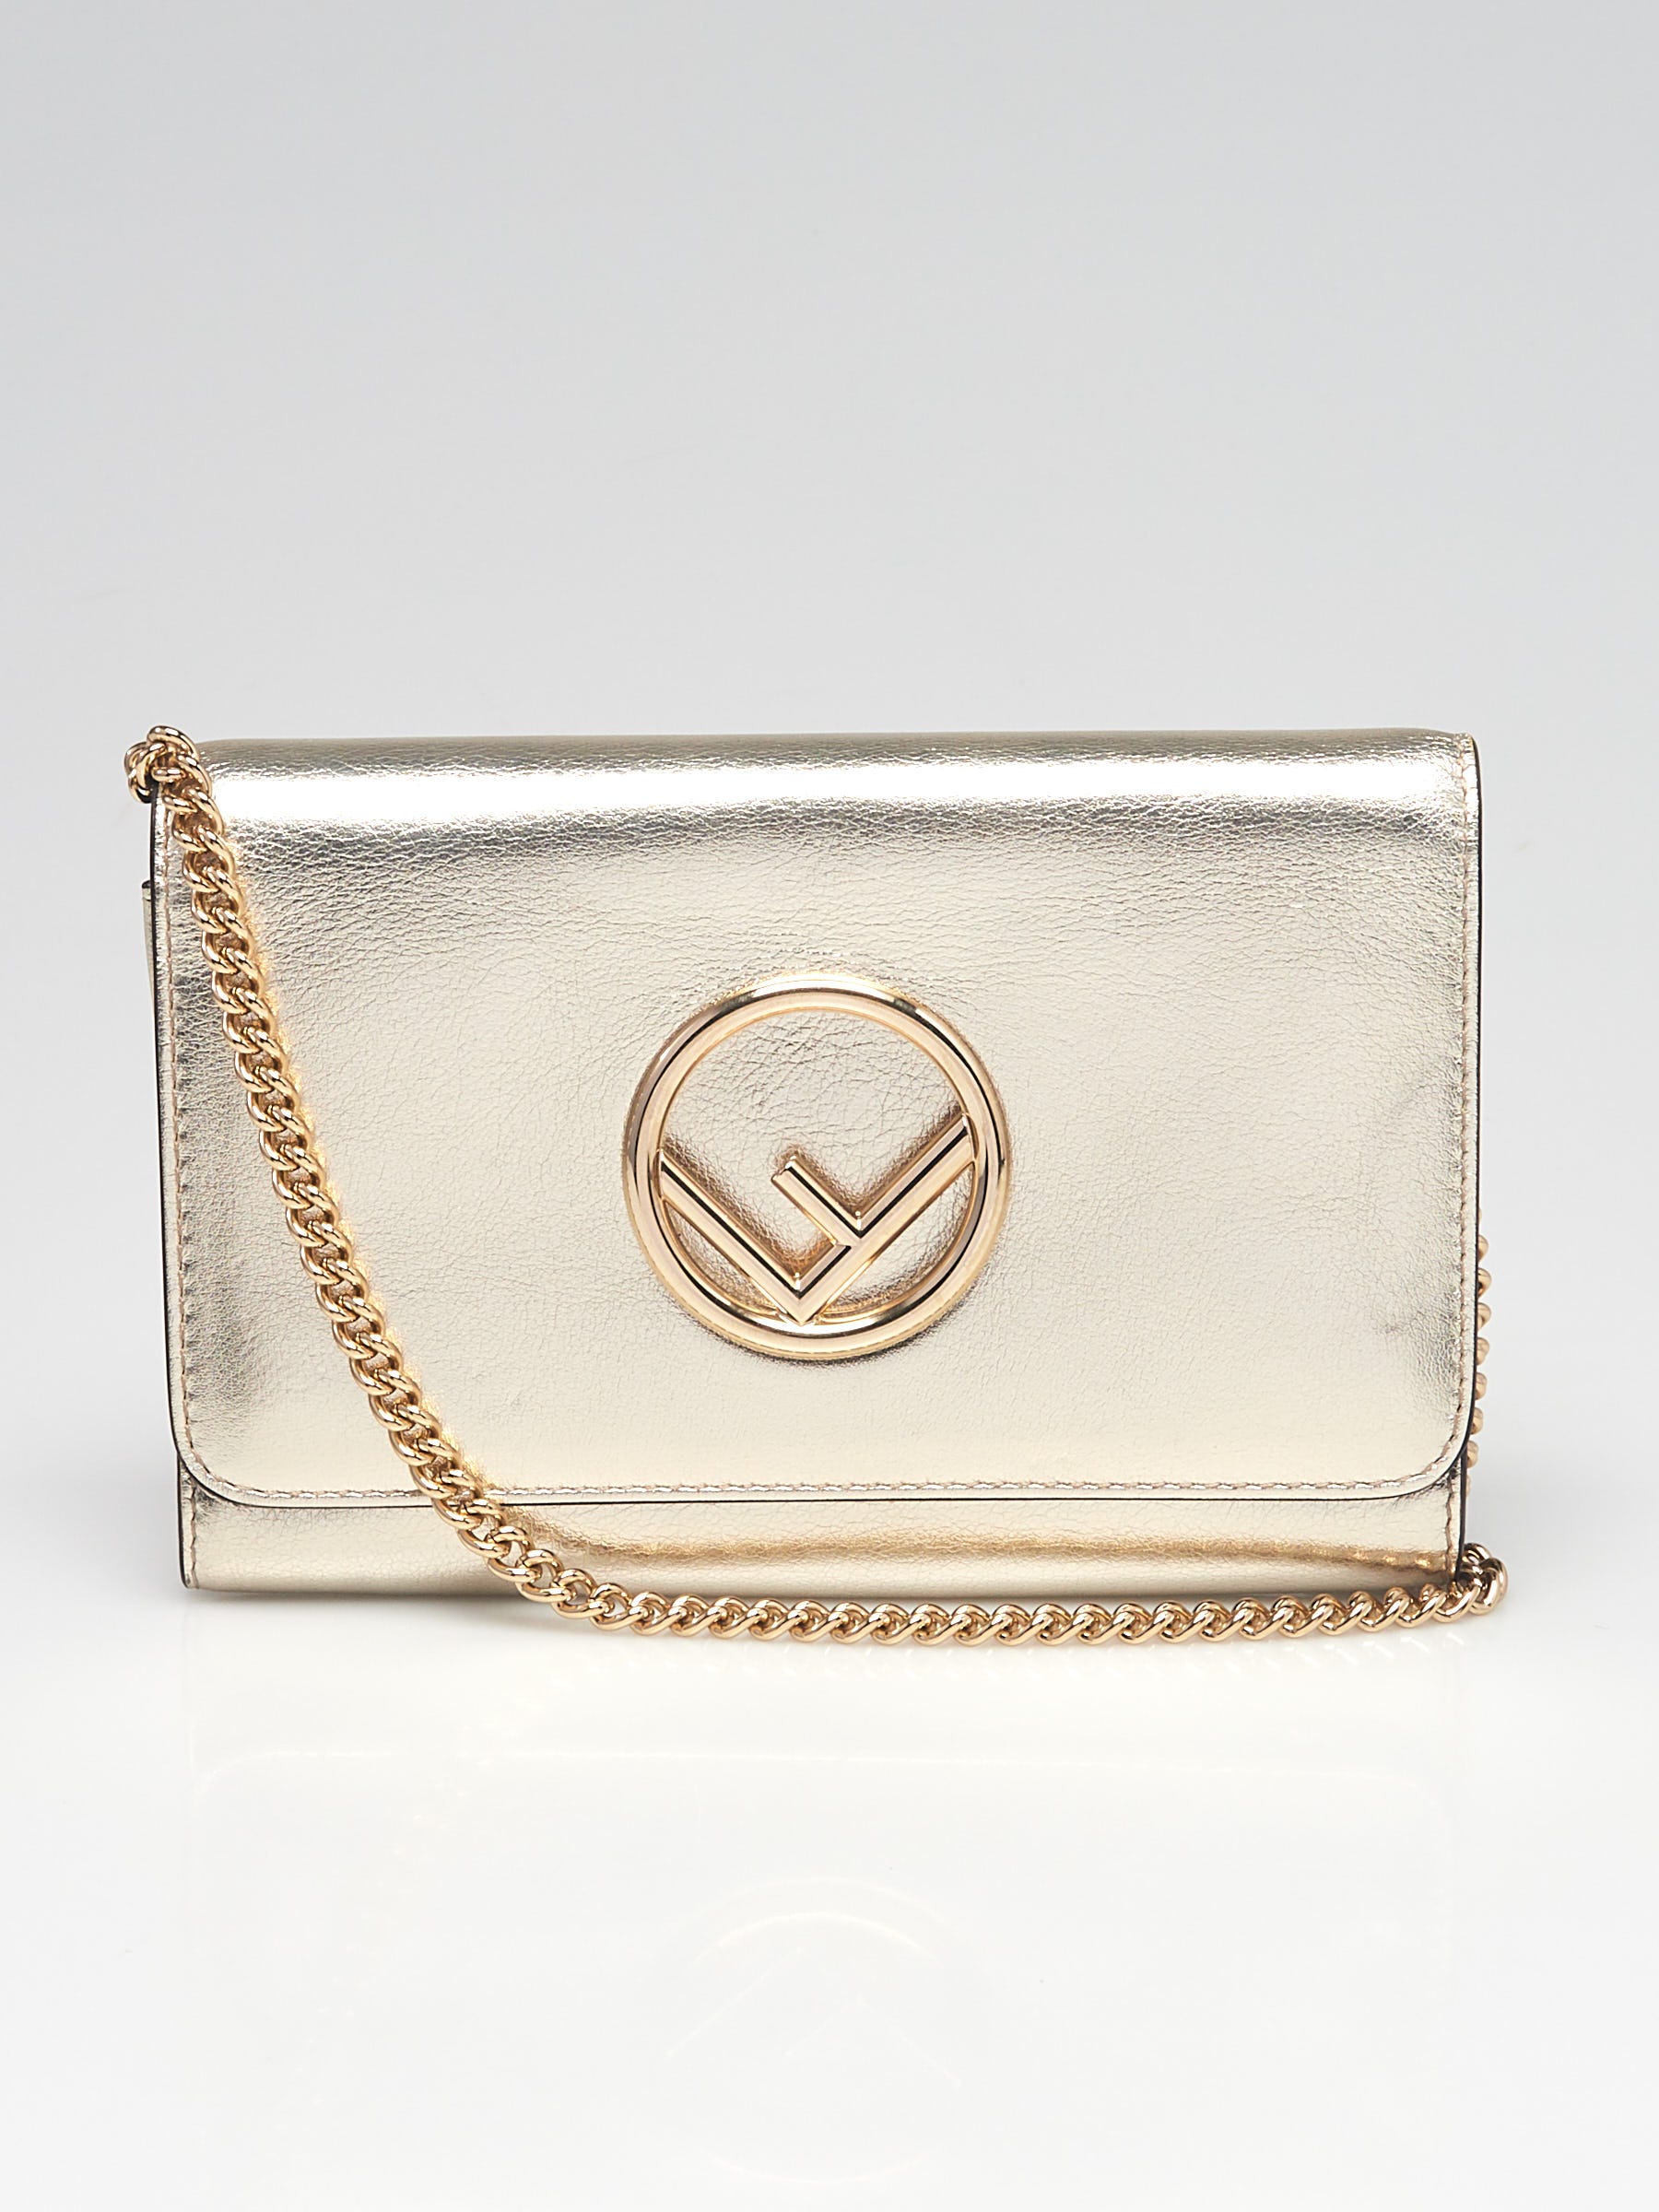 Fendi Gold Leather Wallet On Chain Bag 8BS012 - Yoogi's Closet